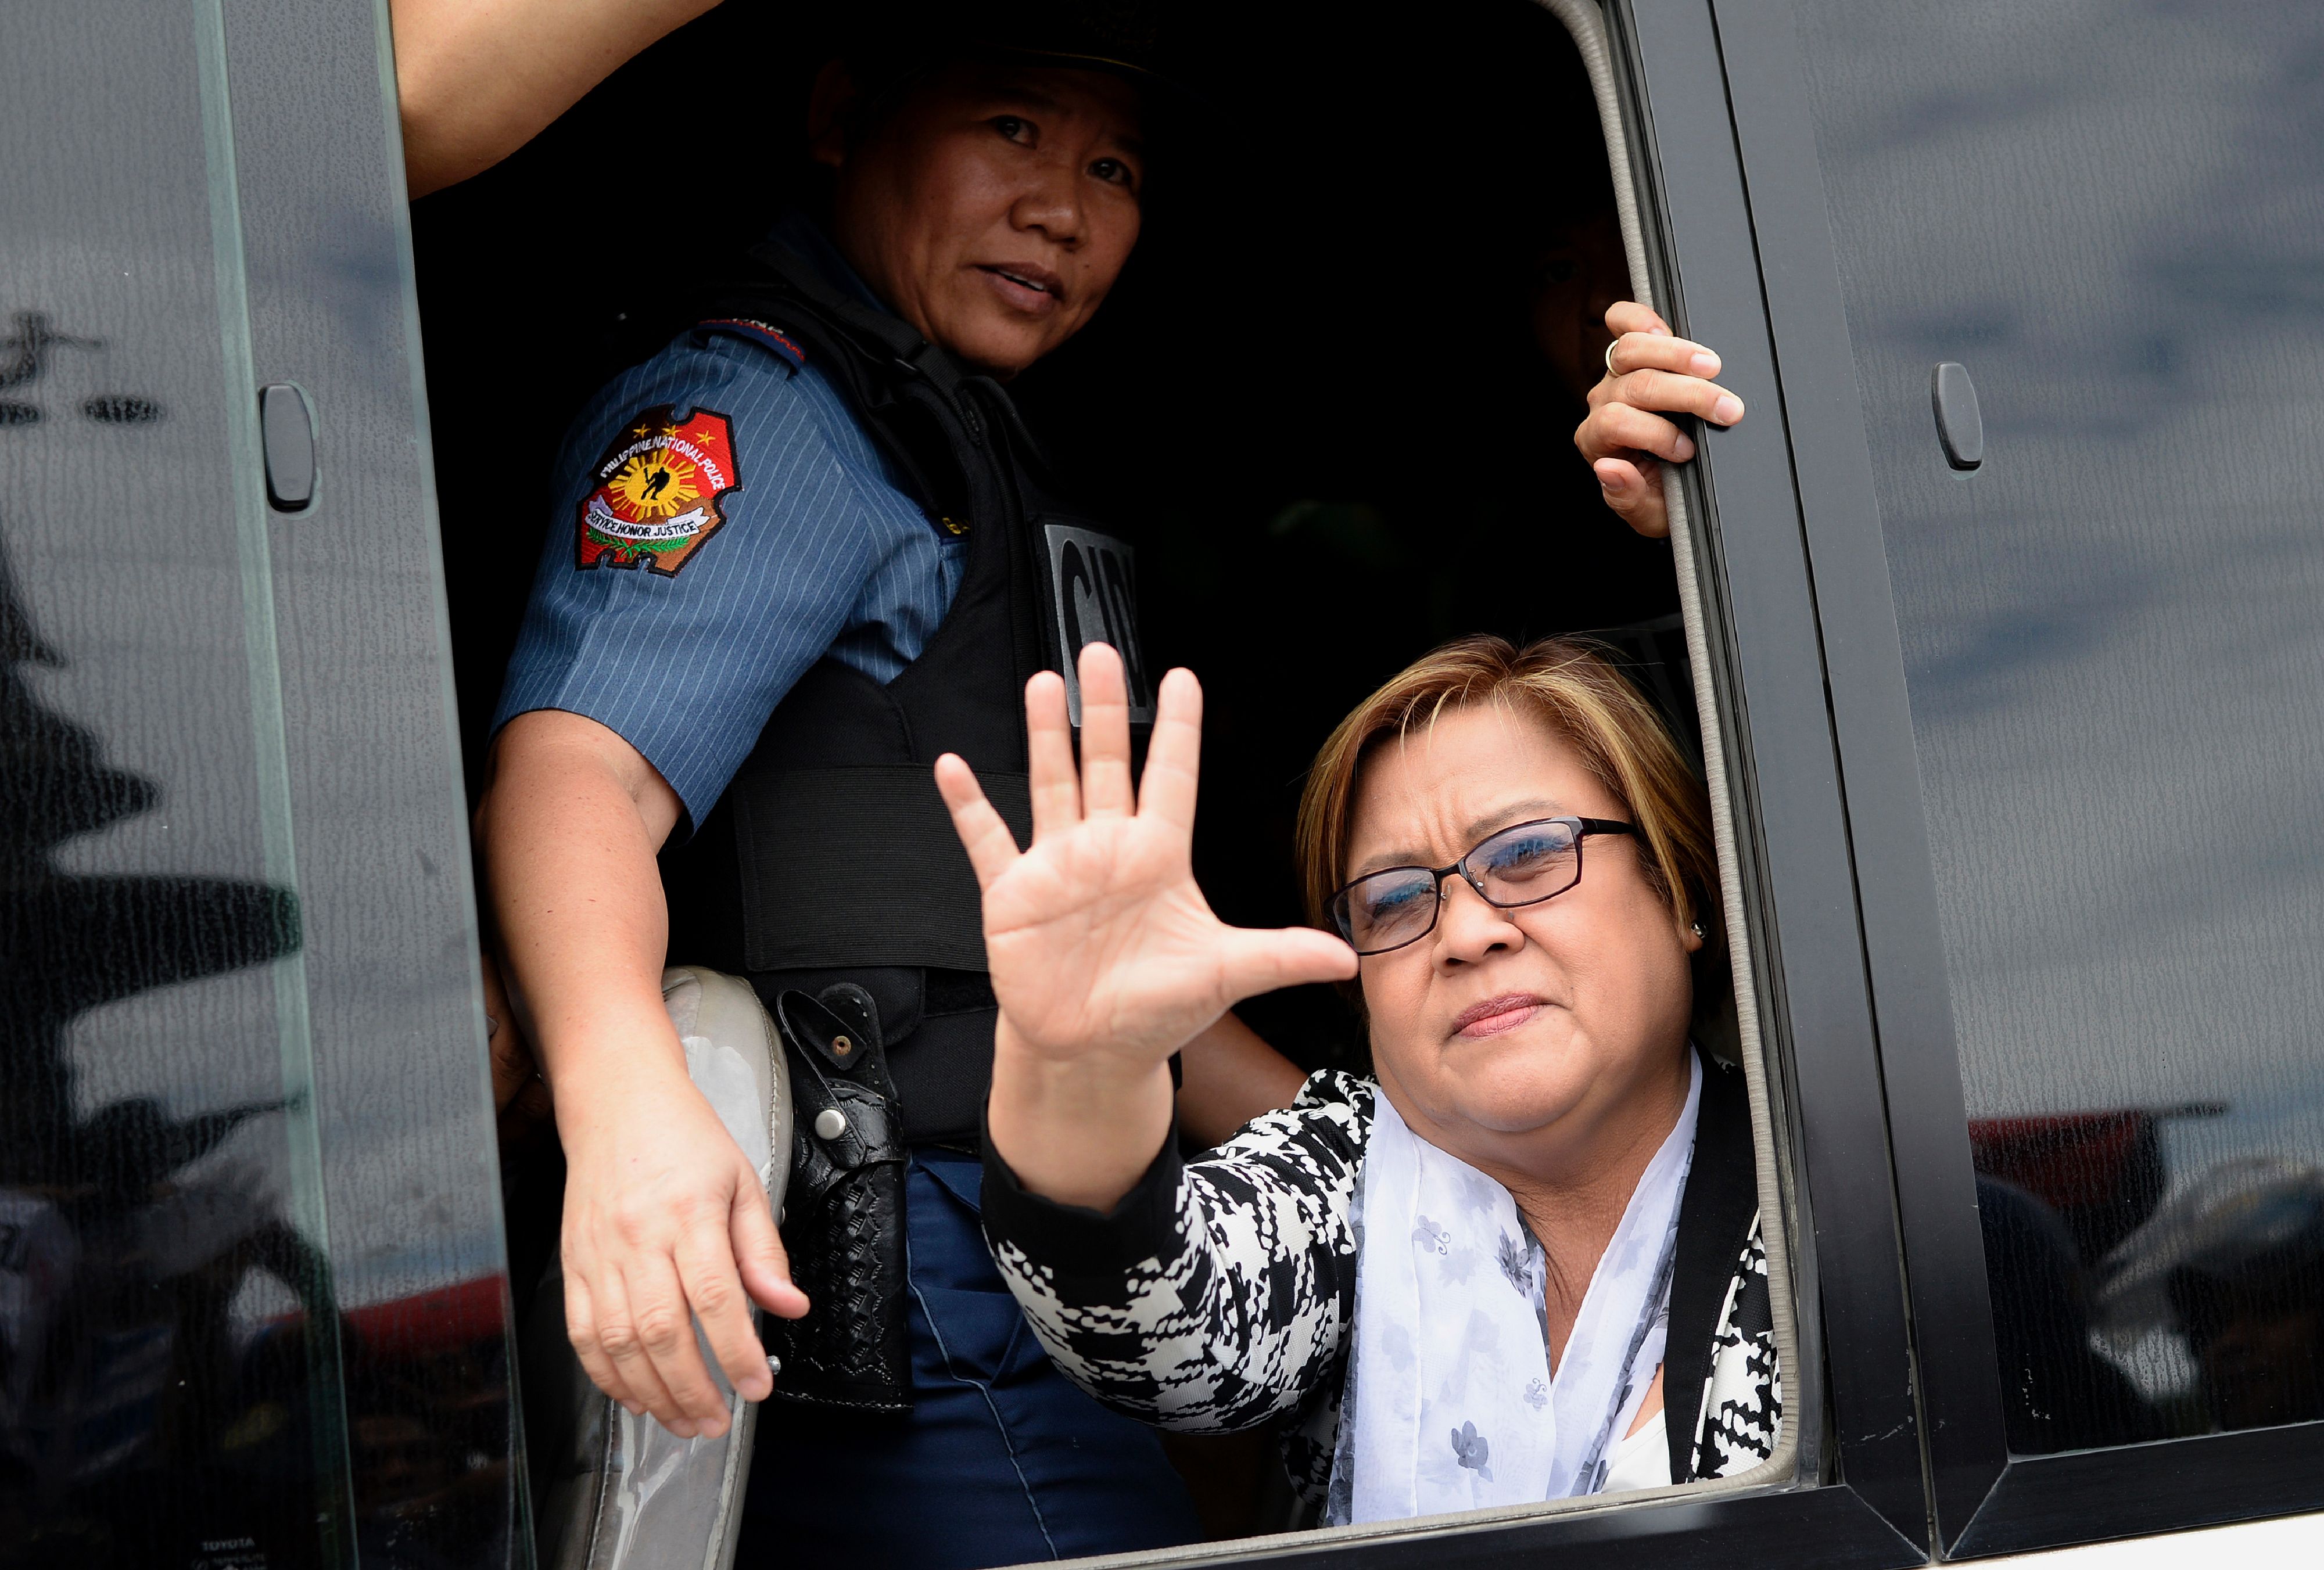 Senator Leila De Lima waves to her supporters after appearing at a court in Muntinlupa City, suburban Manila on February 24, 2017. (Noel Celis—AFP/Getty Images)